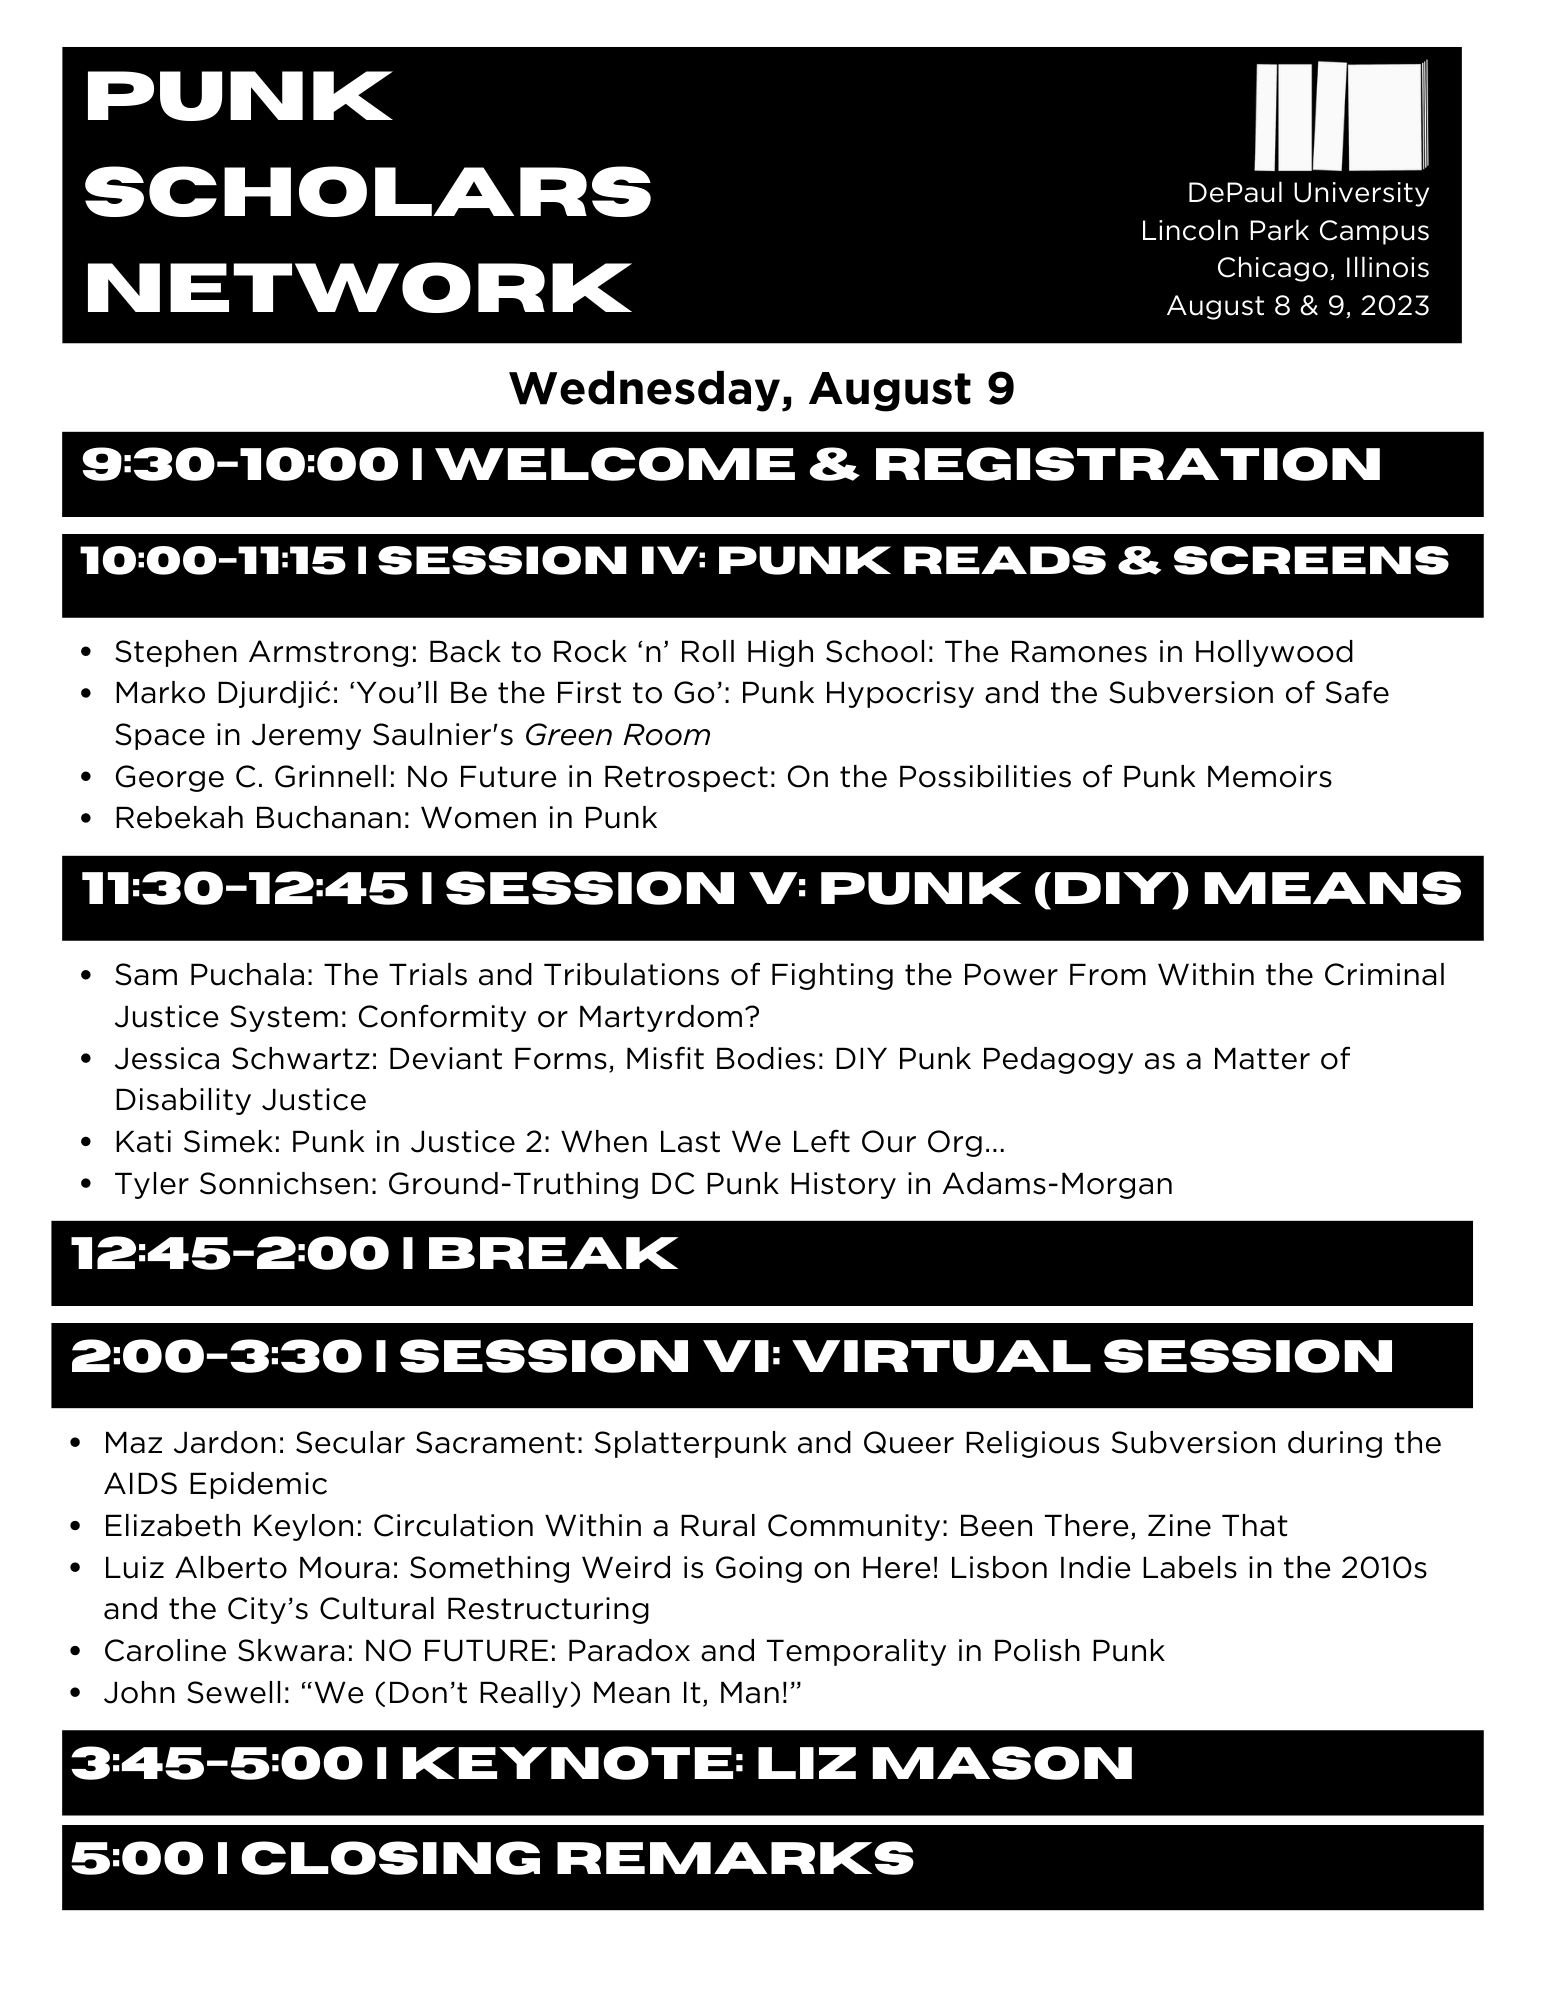 PSN US/Canada Conference Schedule — Punk Scholars Network